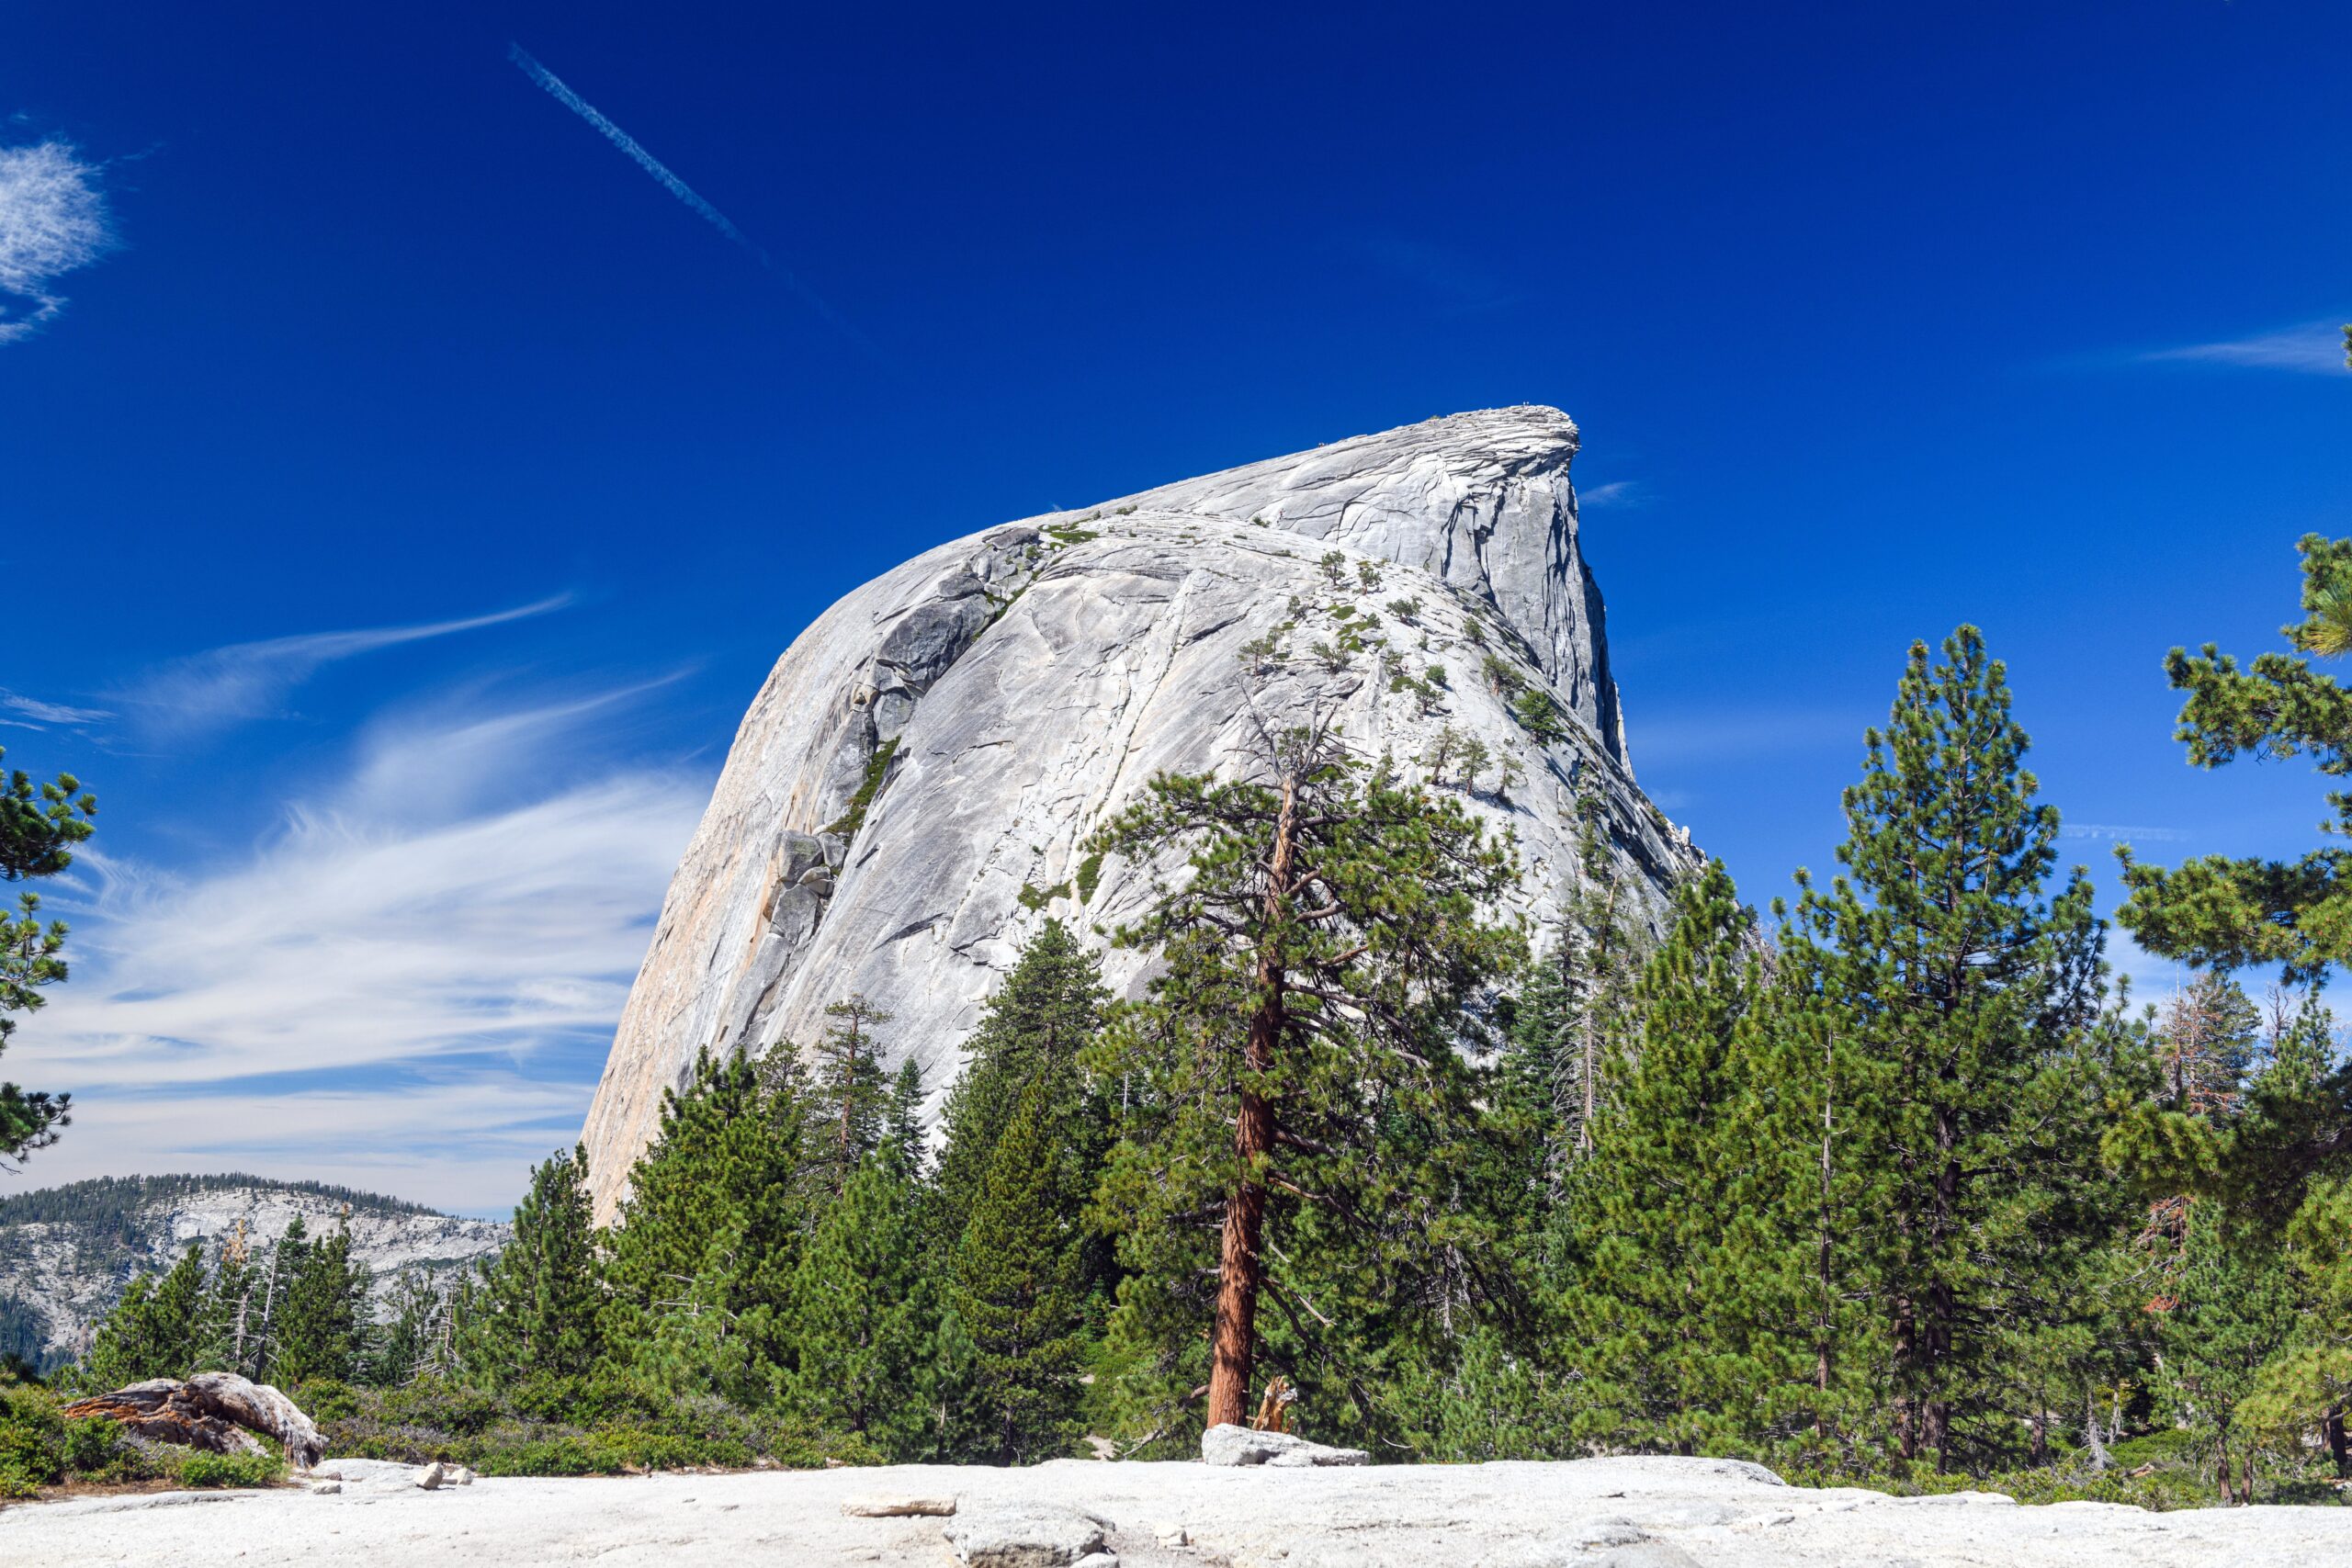 Photo of half dome from the side on a sunny day with trees